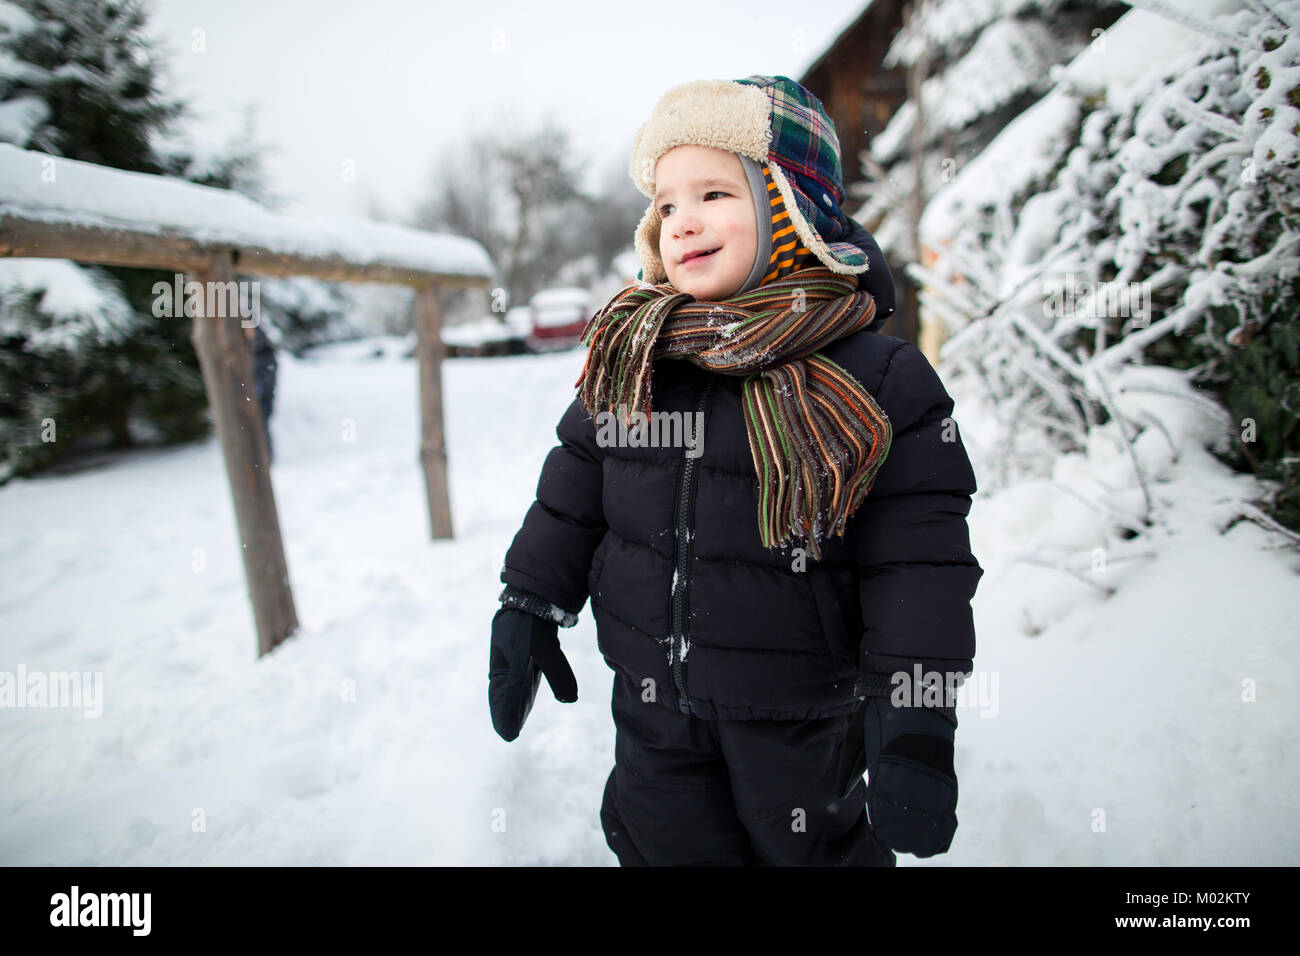 Little child with gentle smile enjoying a snowy day outside. Boy having fun in the snow. Stock Photo